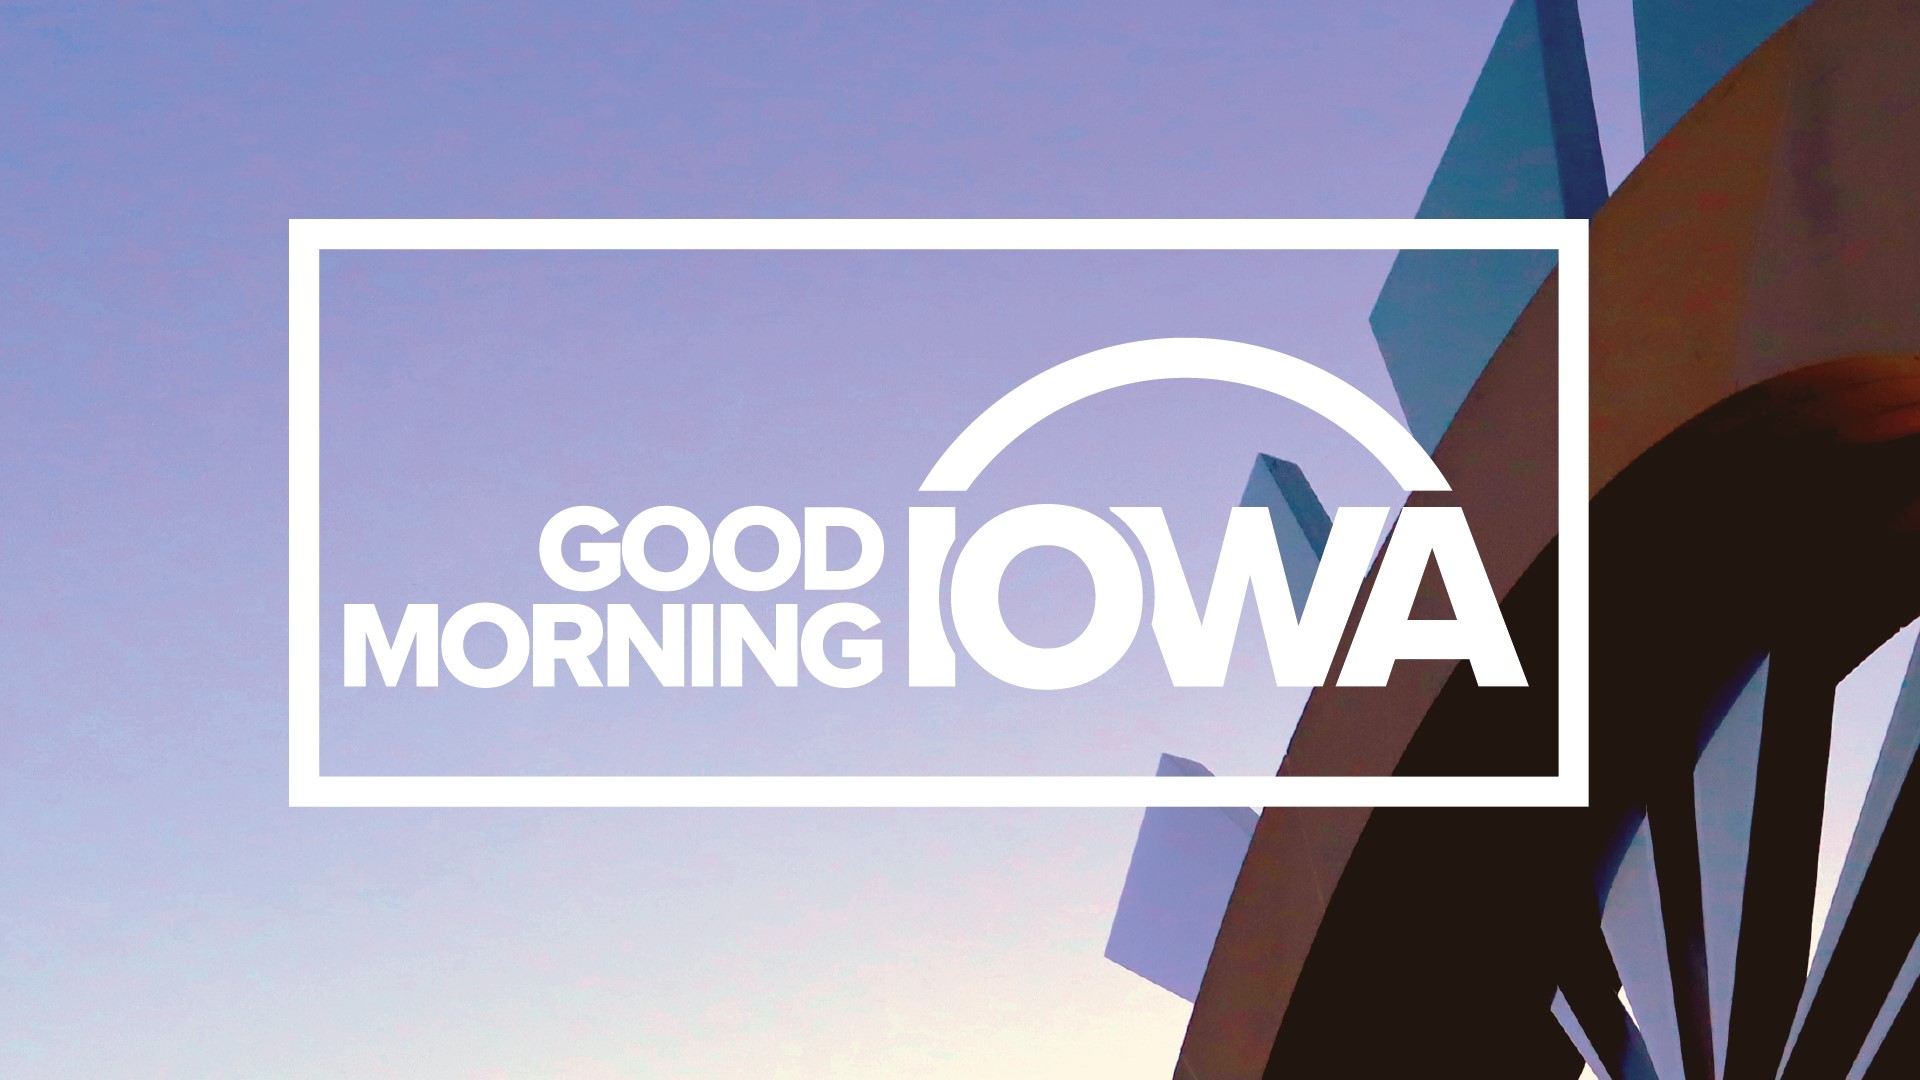 Watch "Good Morning Iowa" every weekday from 5-7 a.m. on Local 5.